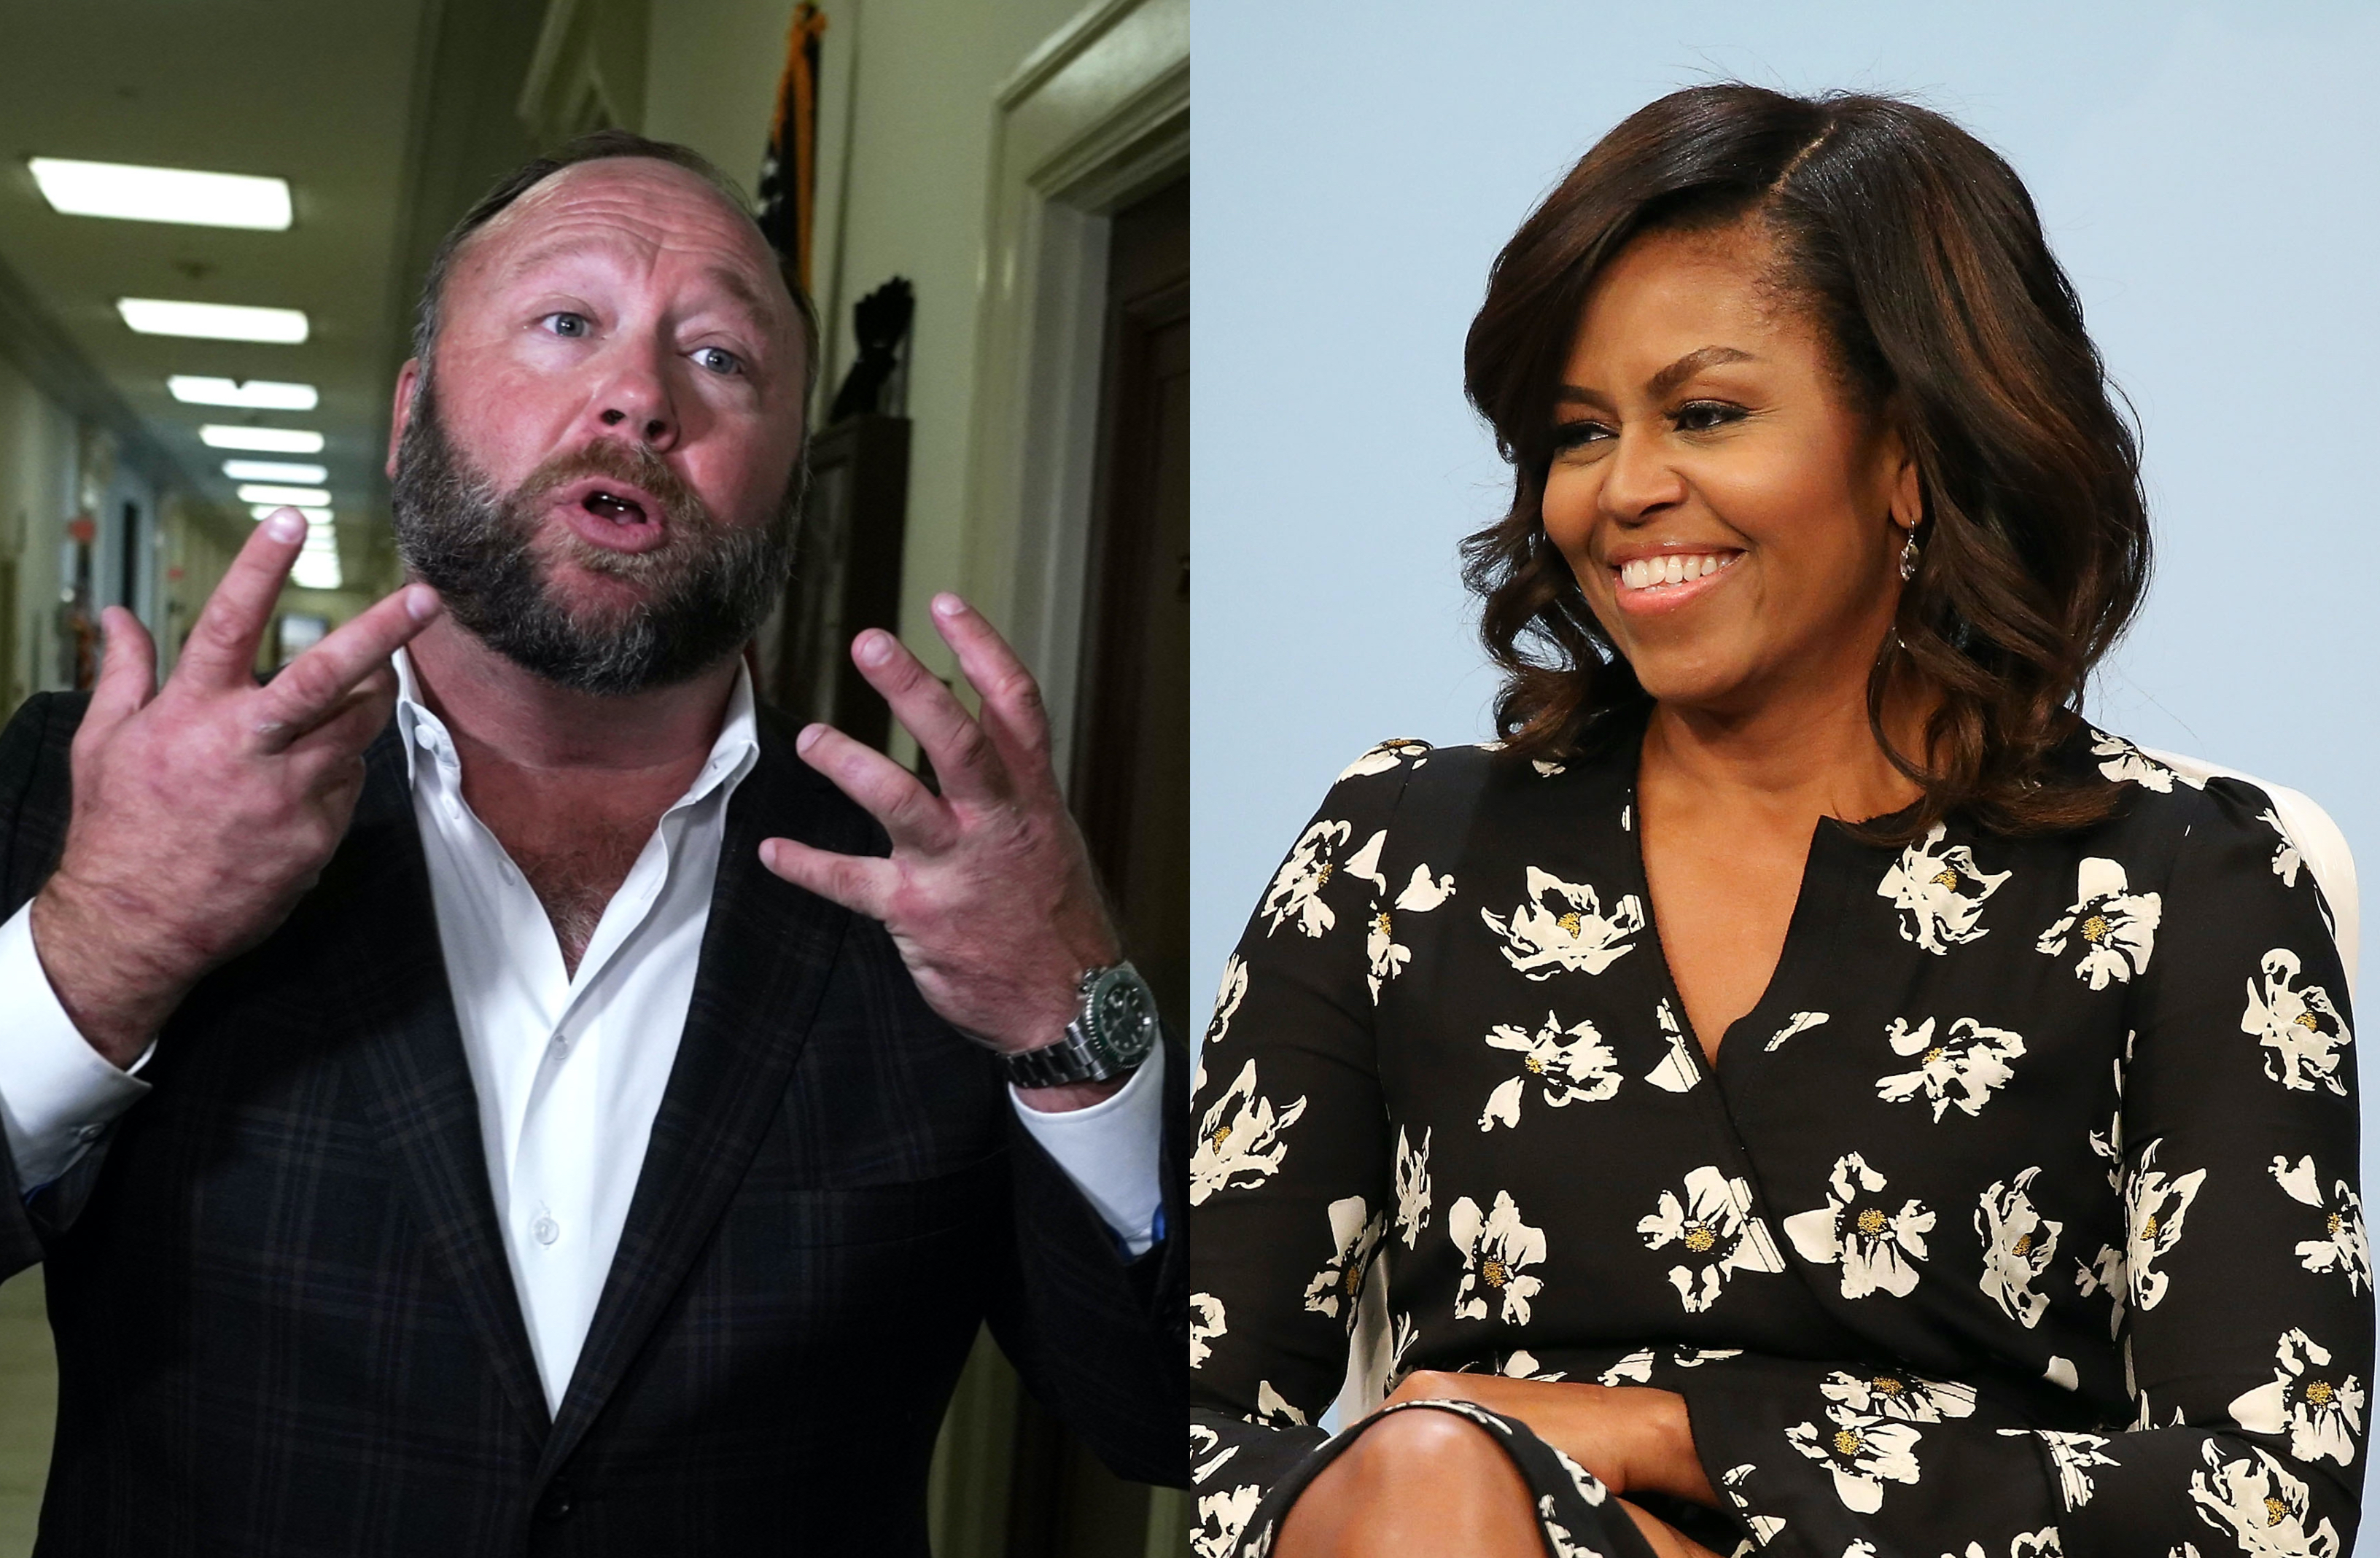 Michelle Obama Fake Porn - Conspiracy theorist claims Michelle Obama is transgender. Yes, really